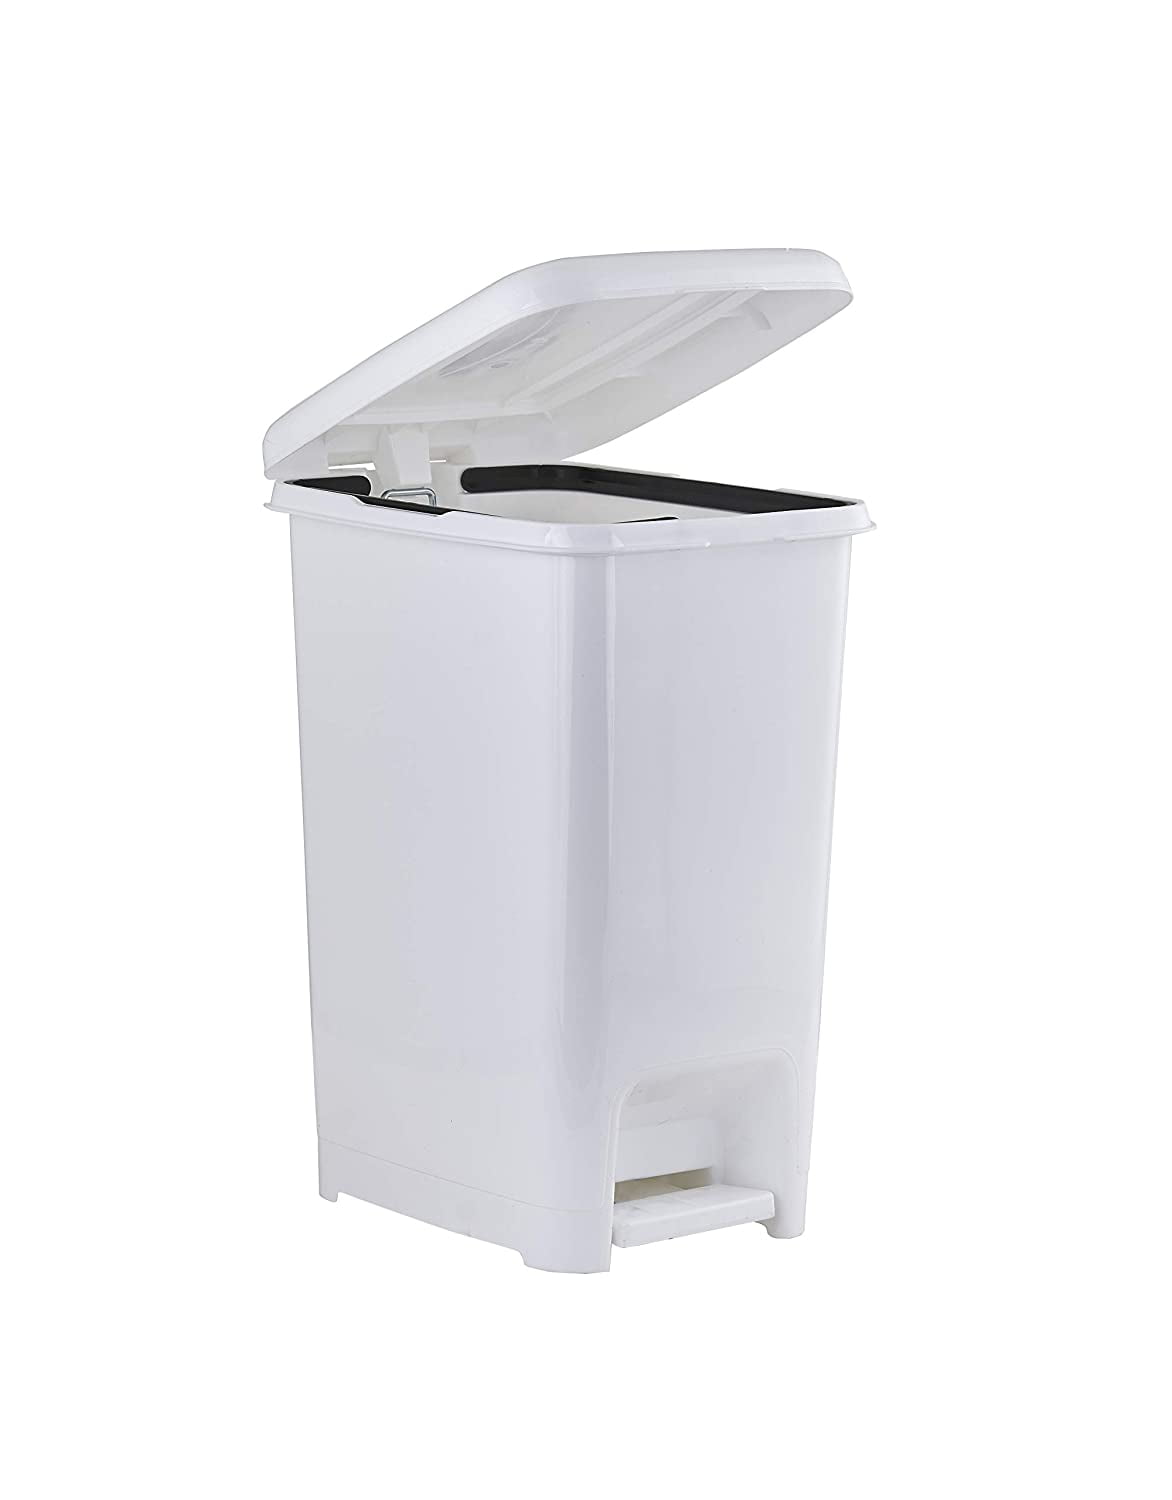 Beige Color By Superio. Details about   Slim 2.5-gallon Step on Space Savor Trash Can with Lid 